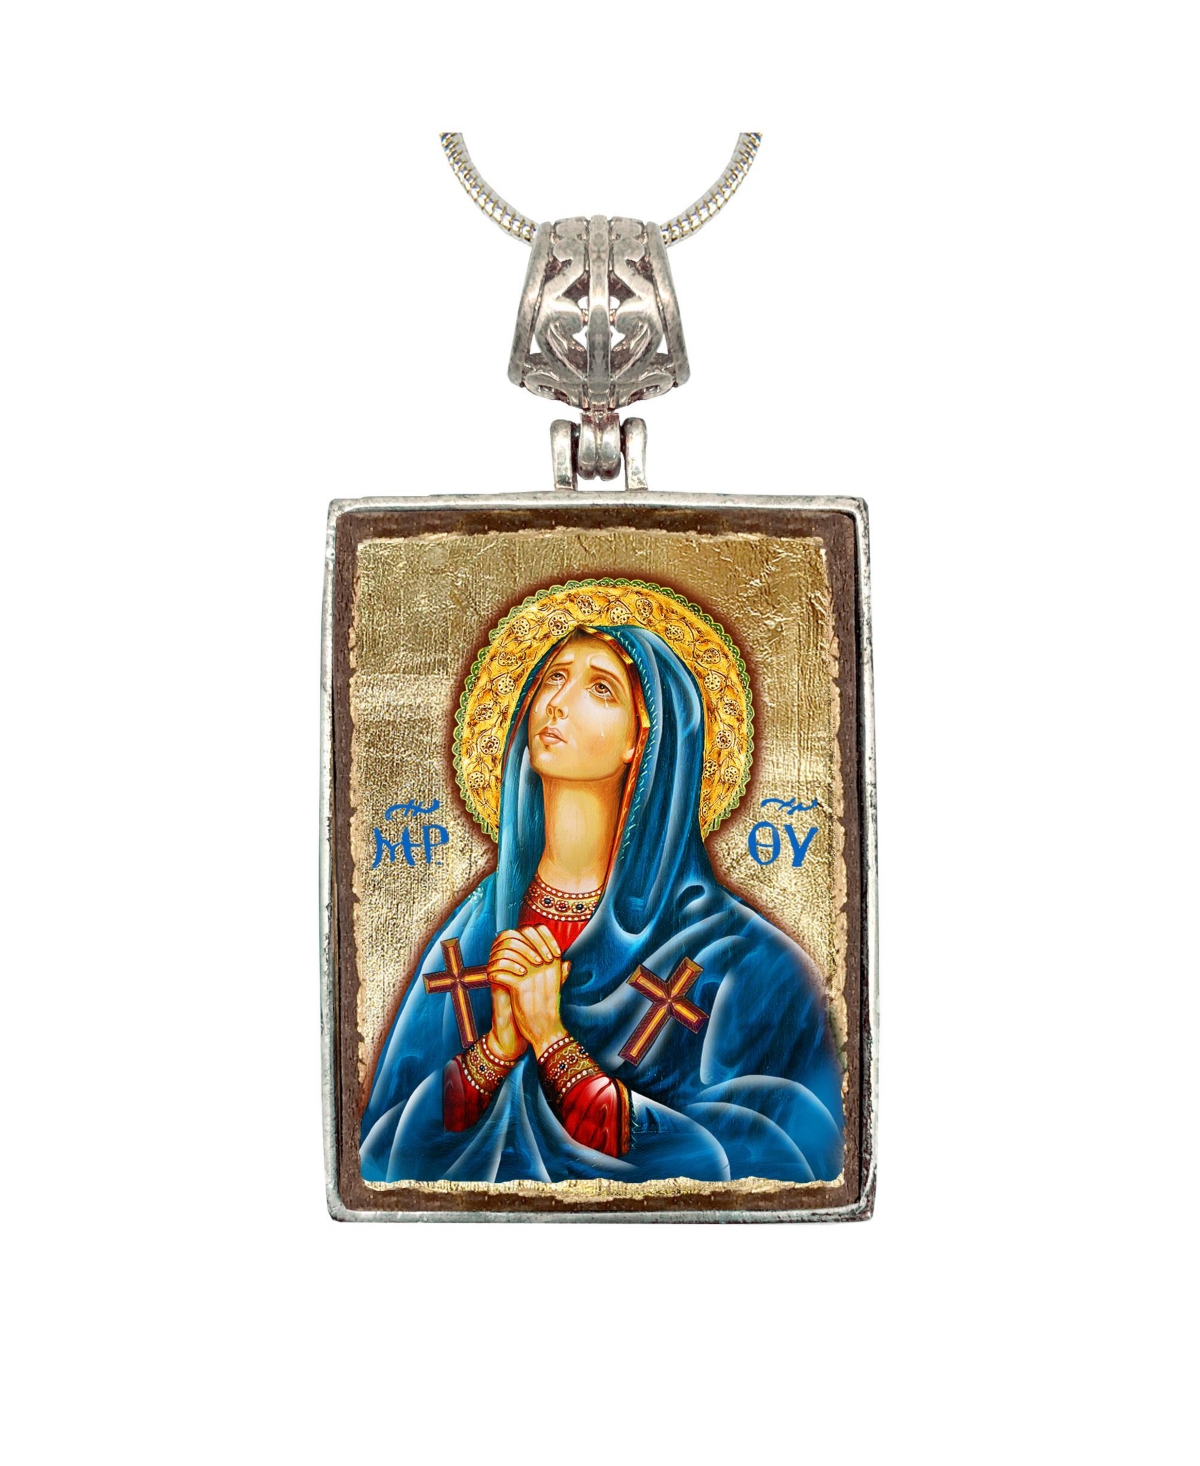 Maria Magdalena Religious Holiday Jewelry Necklace Monastery Icons - Multi Color